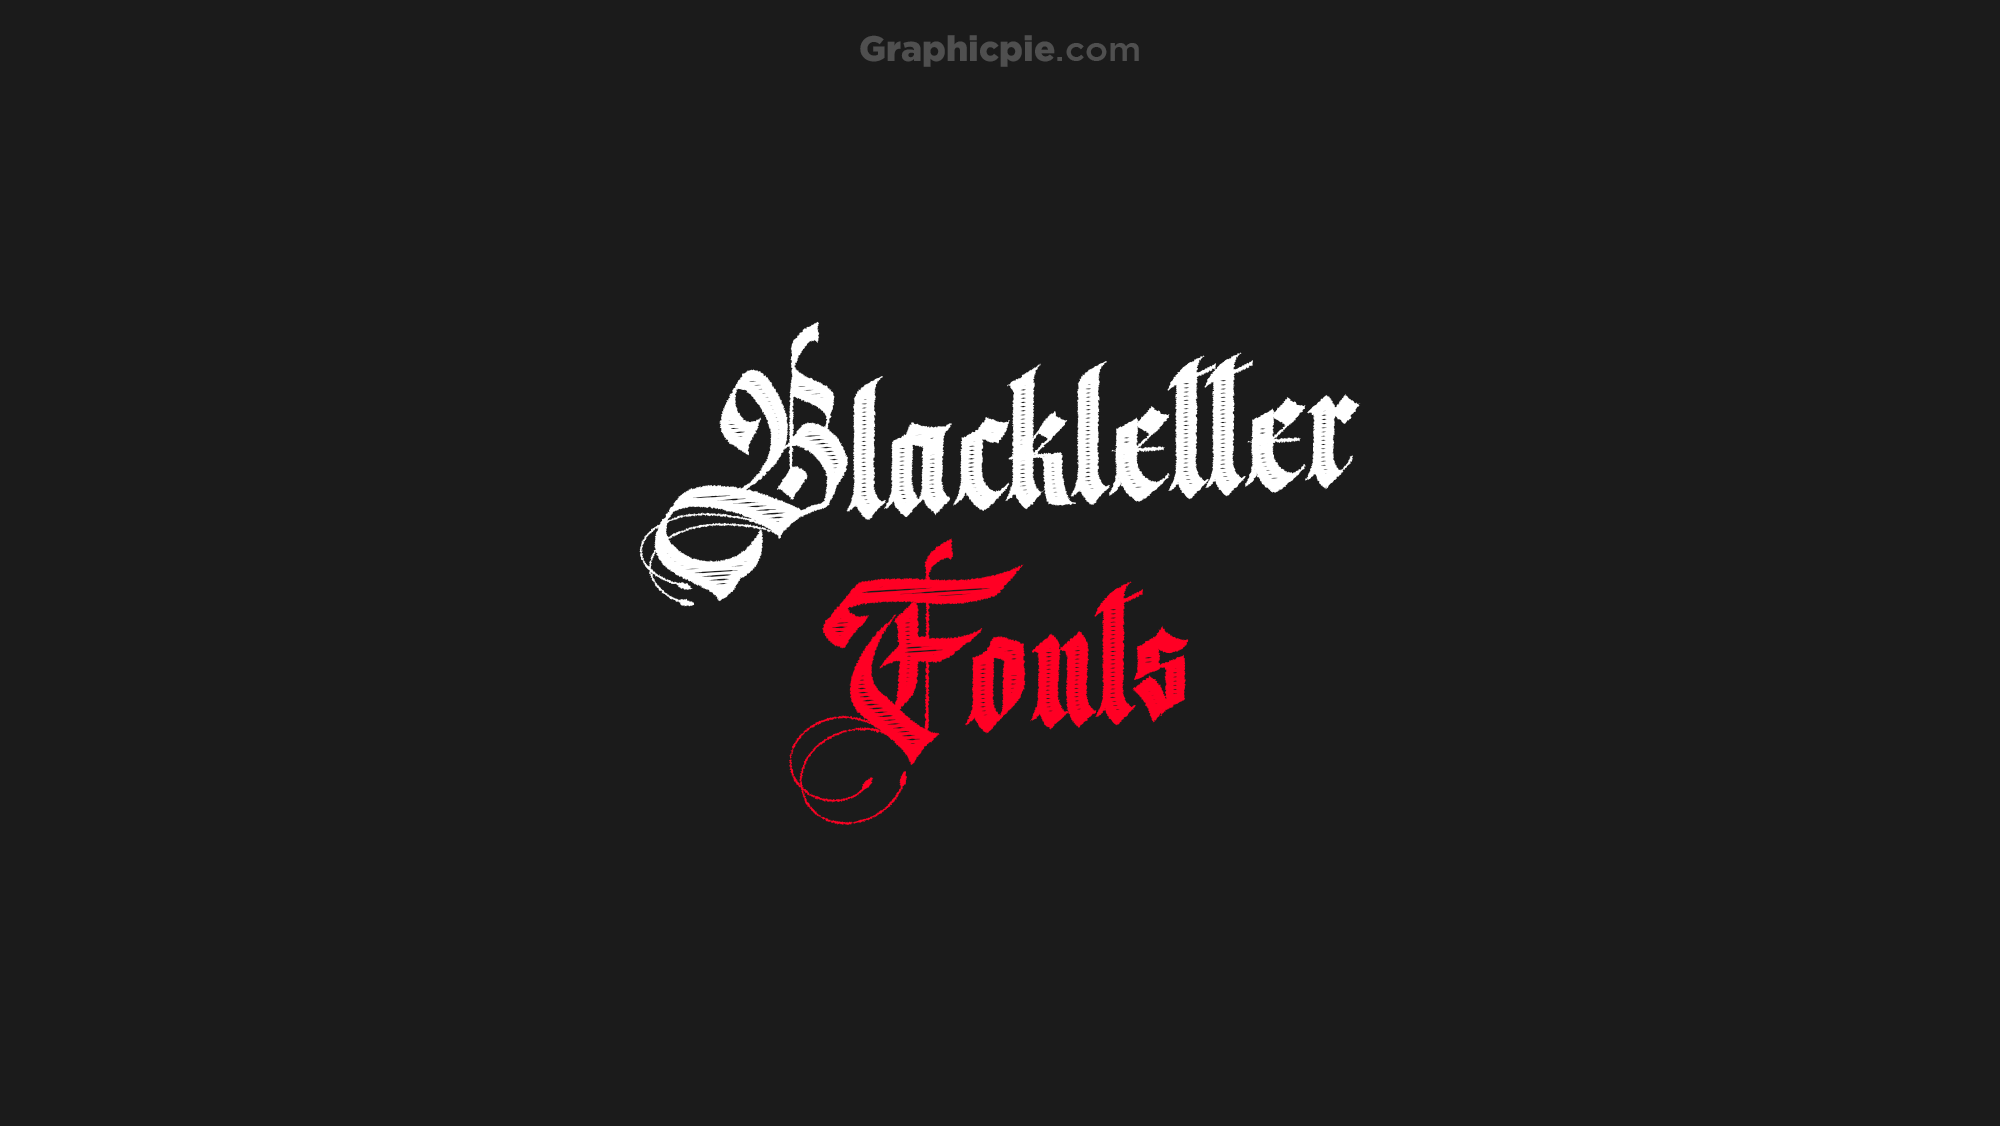 8 Blackletter Fonts You Can Find On Google Docs Graphic Pie